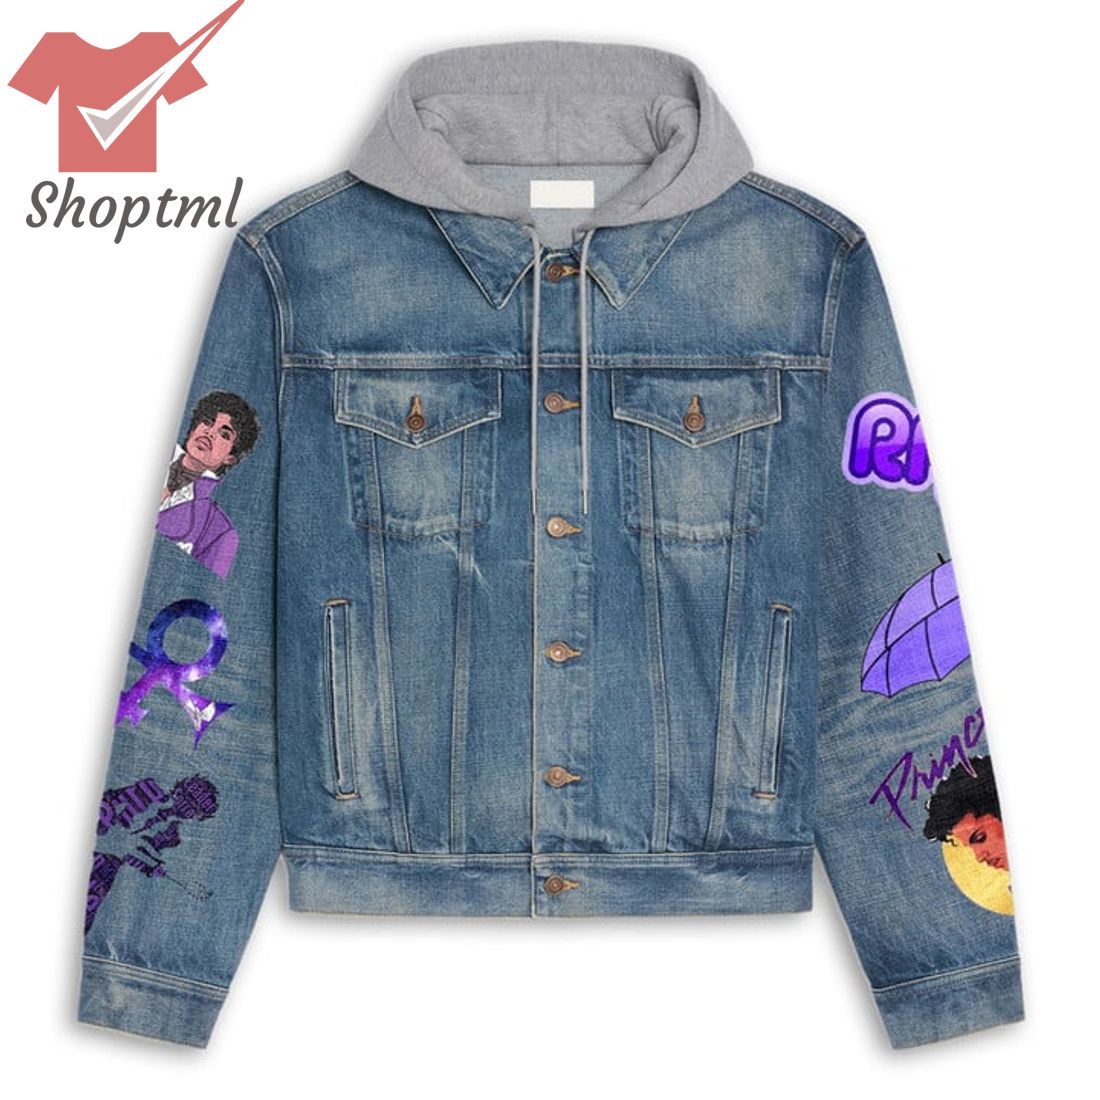 Prince Life Is Just A Party Parties Weren't Meant To Last Hooded Denim Jacket